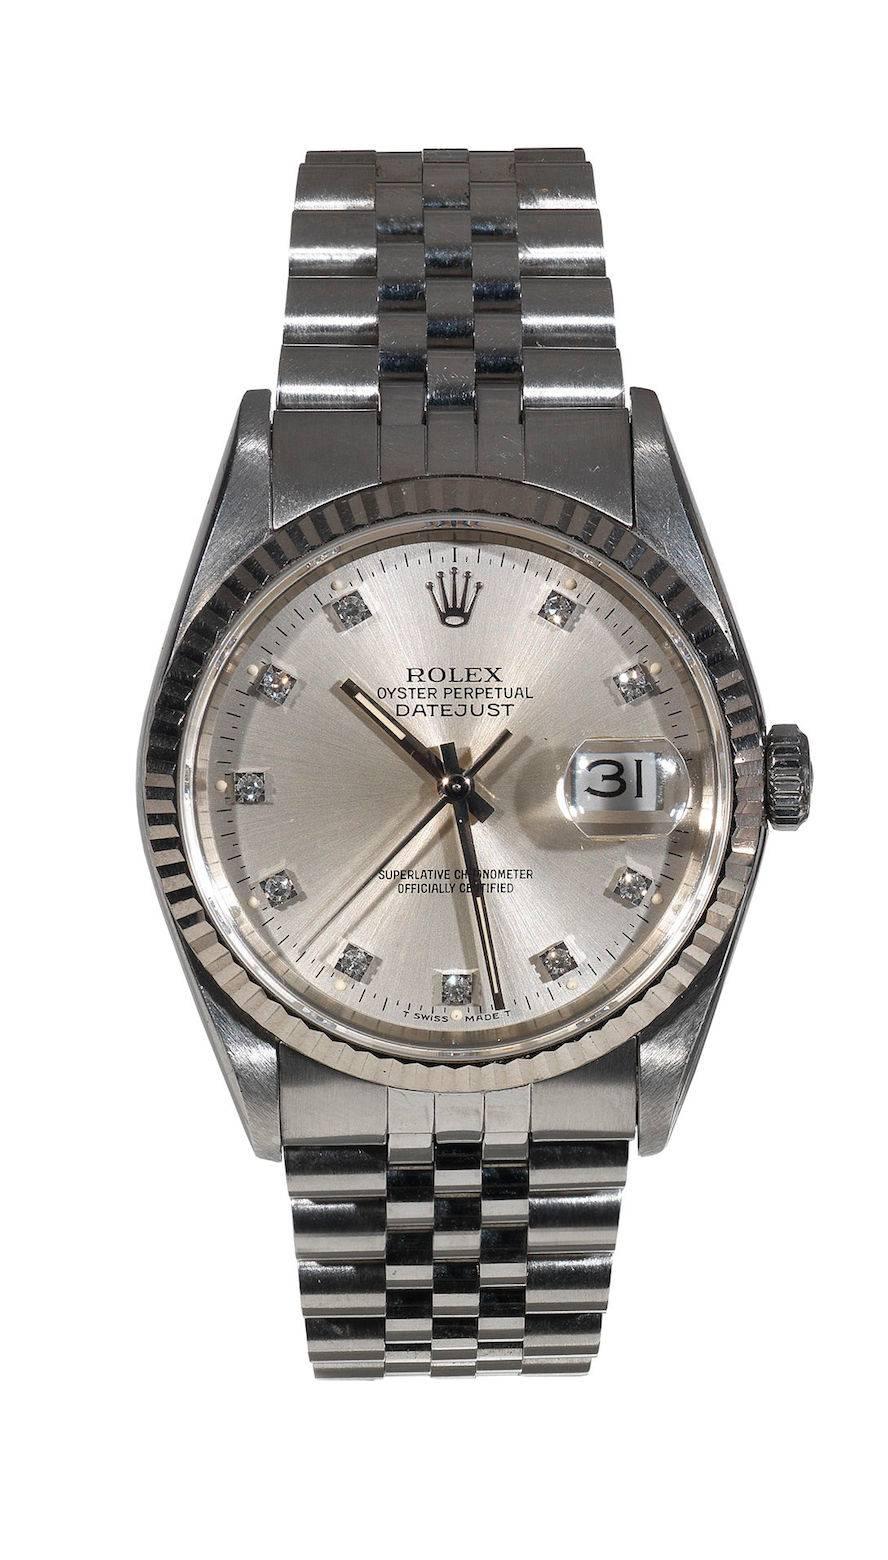 Ref. 16234, Case n° X148738, made on 1991, sold on 1992
31-jewel Cal.3135 automatic movement, silvered dial, outer minute divisions, diamond set hour numerals, baton hands, magnified date aperture, sweep centre seconds, brushed and polished case,